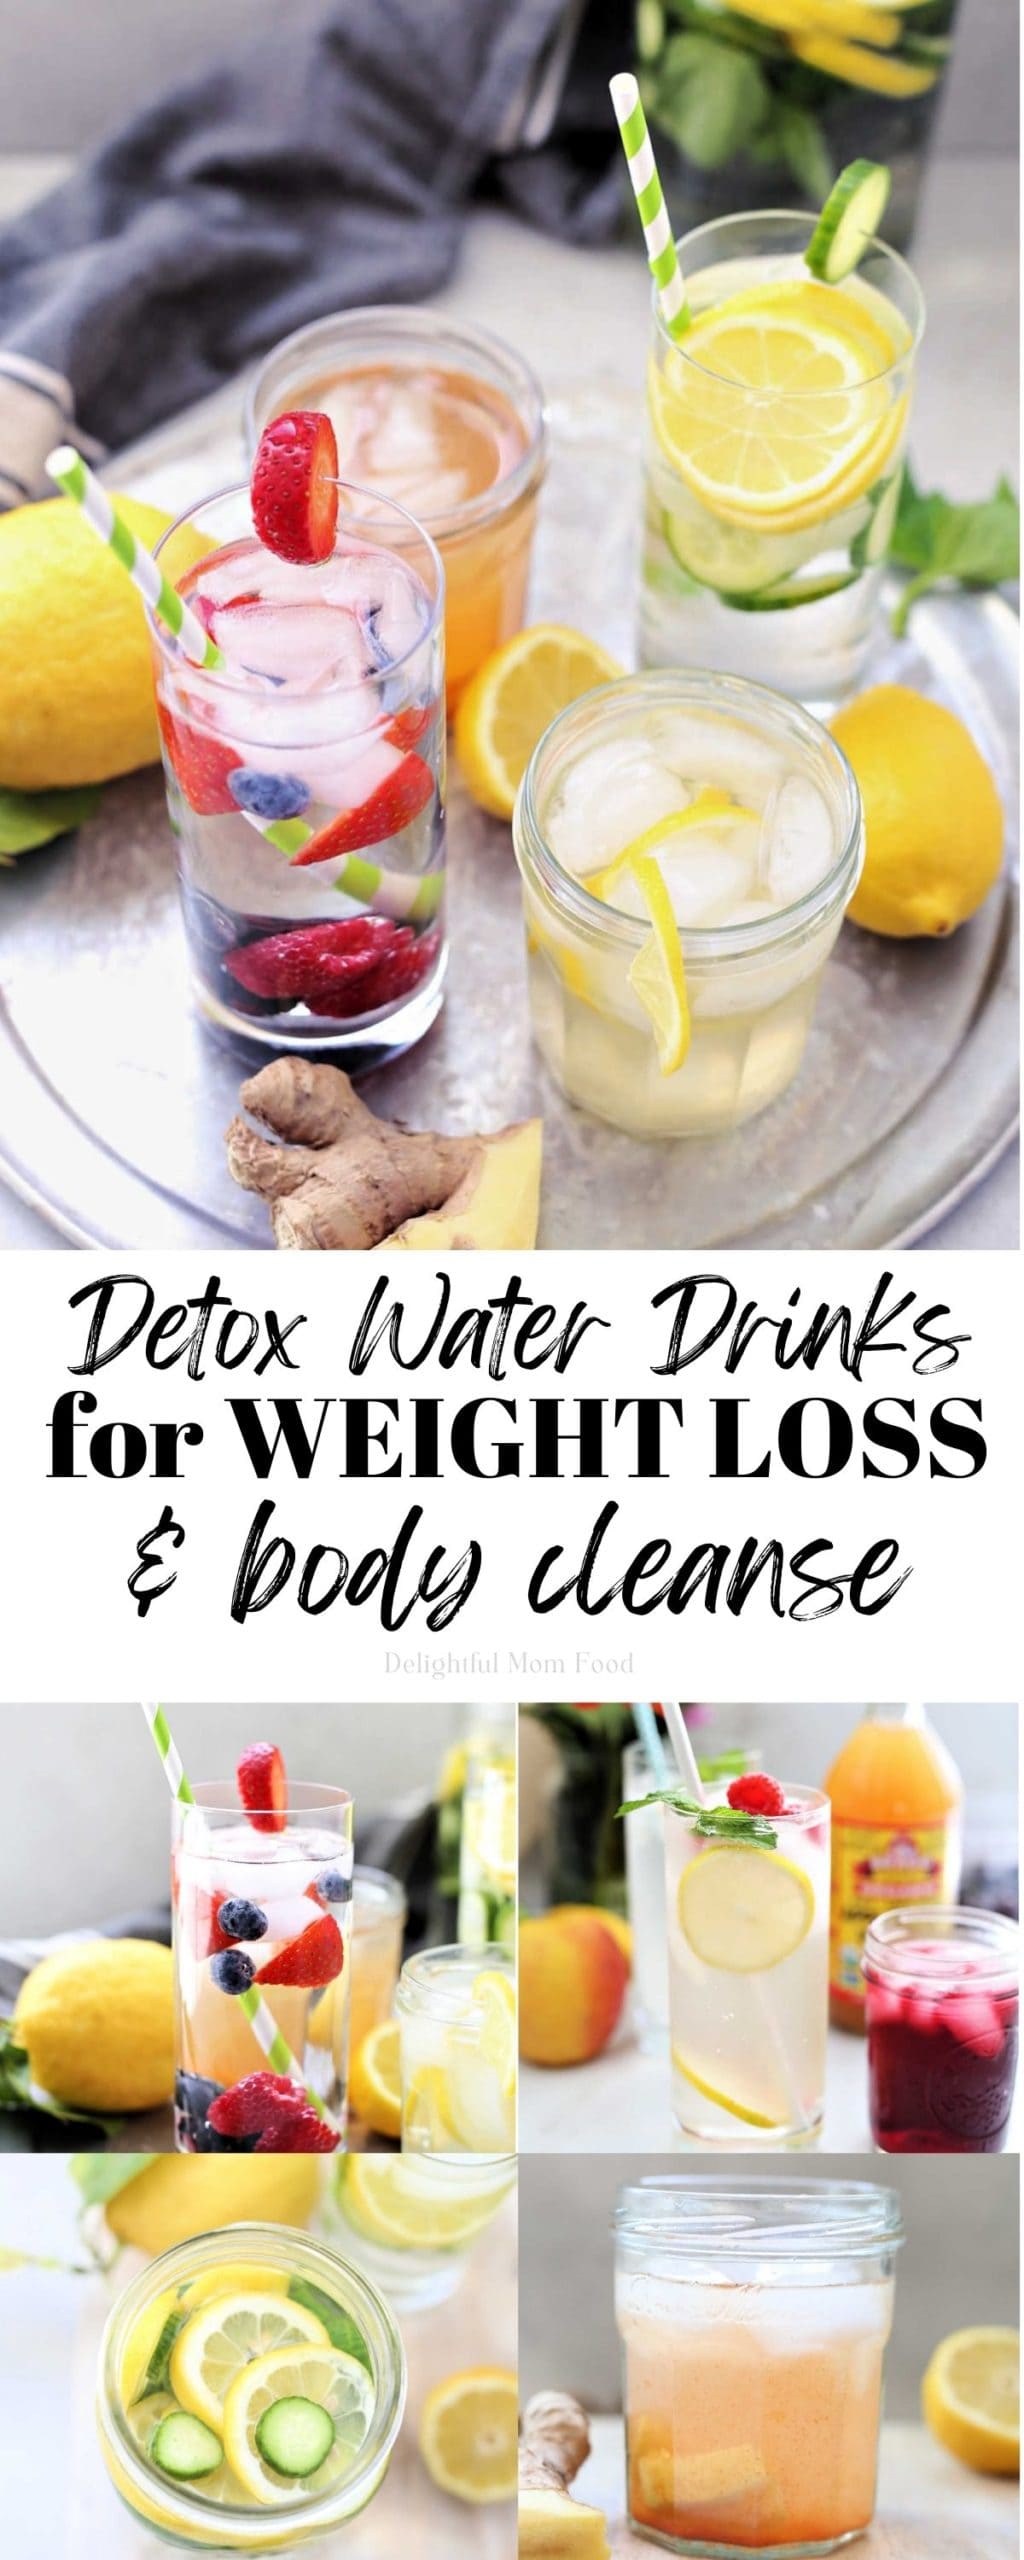 Drinking detox water for weight loss is the ultimate cleanse to heal your gut and transform your body! These detox water recipes boost your metabolism, eliminate toxins and amplify glowing skin! #detox #water #cleanse #recipes #weightloss #detoxwater #detoxdrinks | Delightful Mom Food